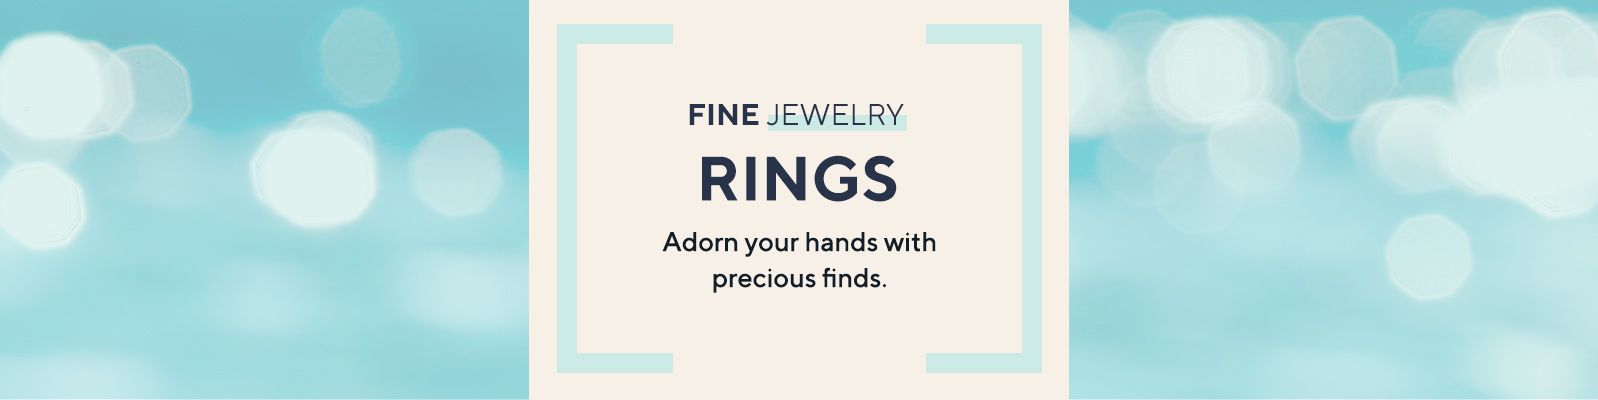 Fine Jewelry - Rings - Adorn your hands with precious finds.